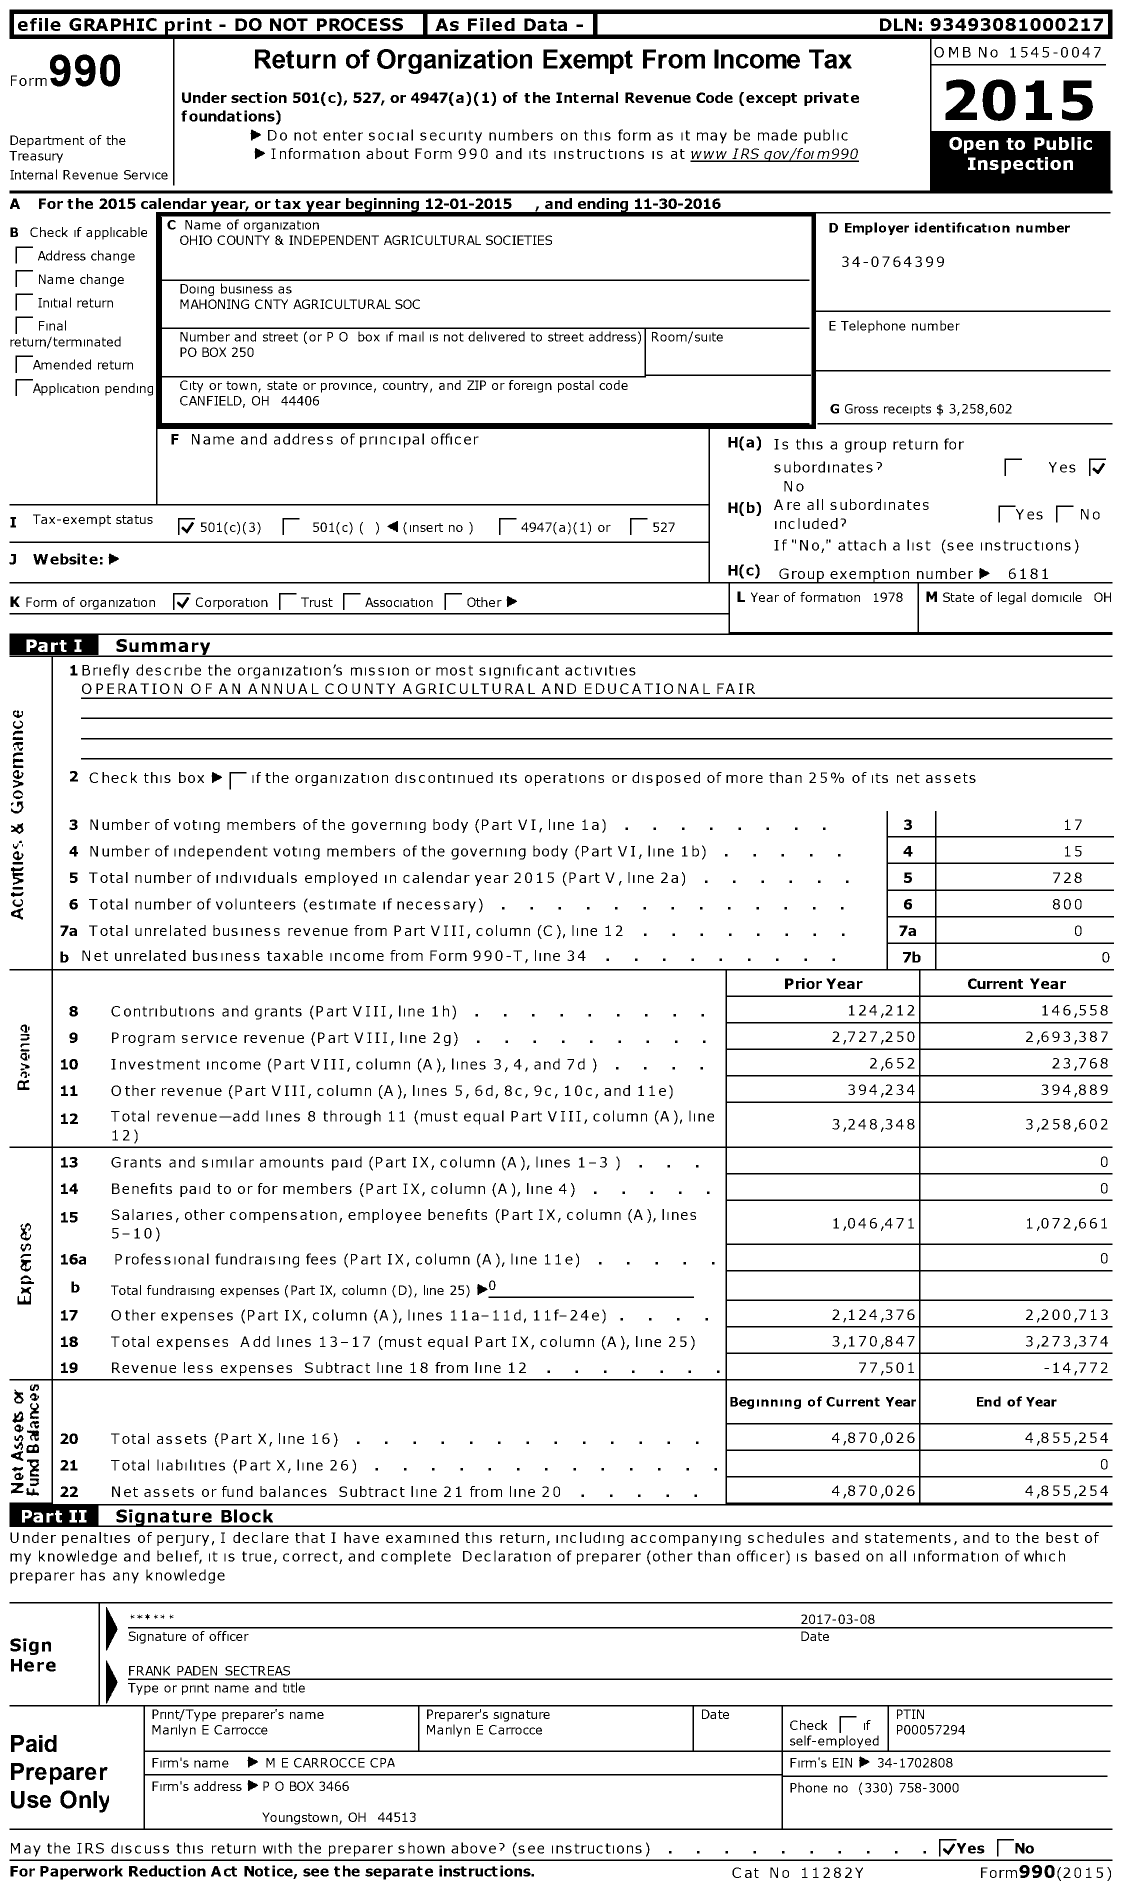 Image of first page of 2015 Form 990 for Ohio County and Independent Agricultural Societies